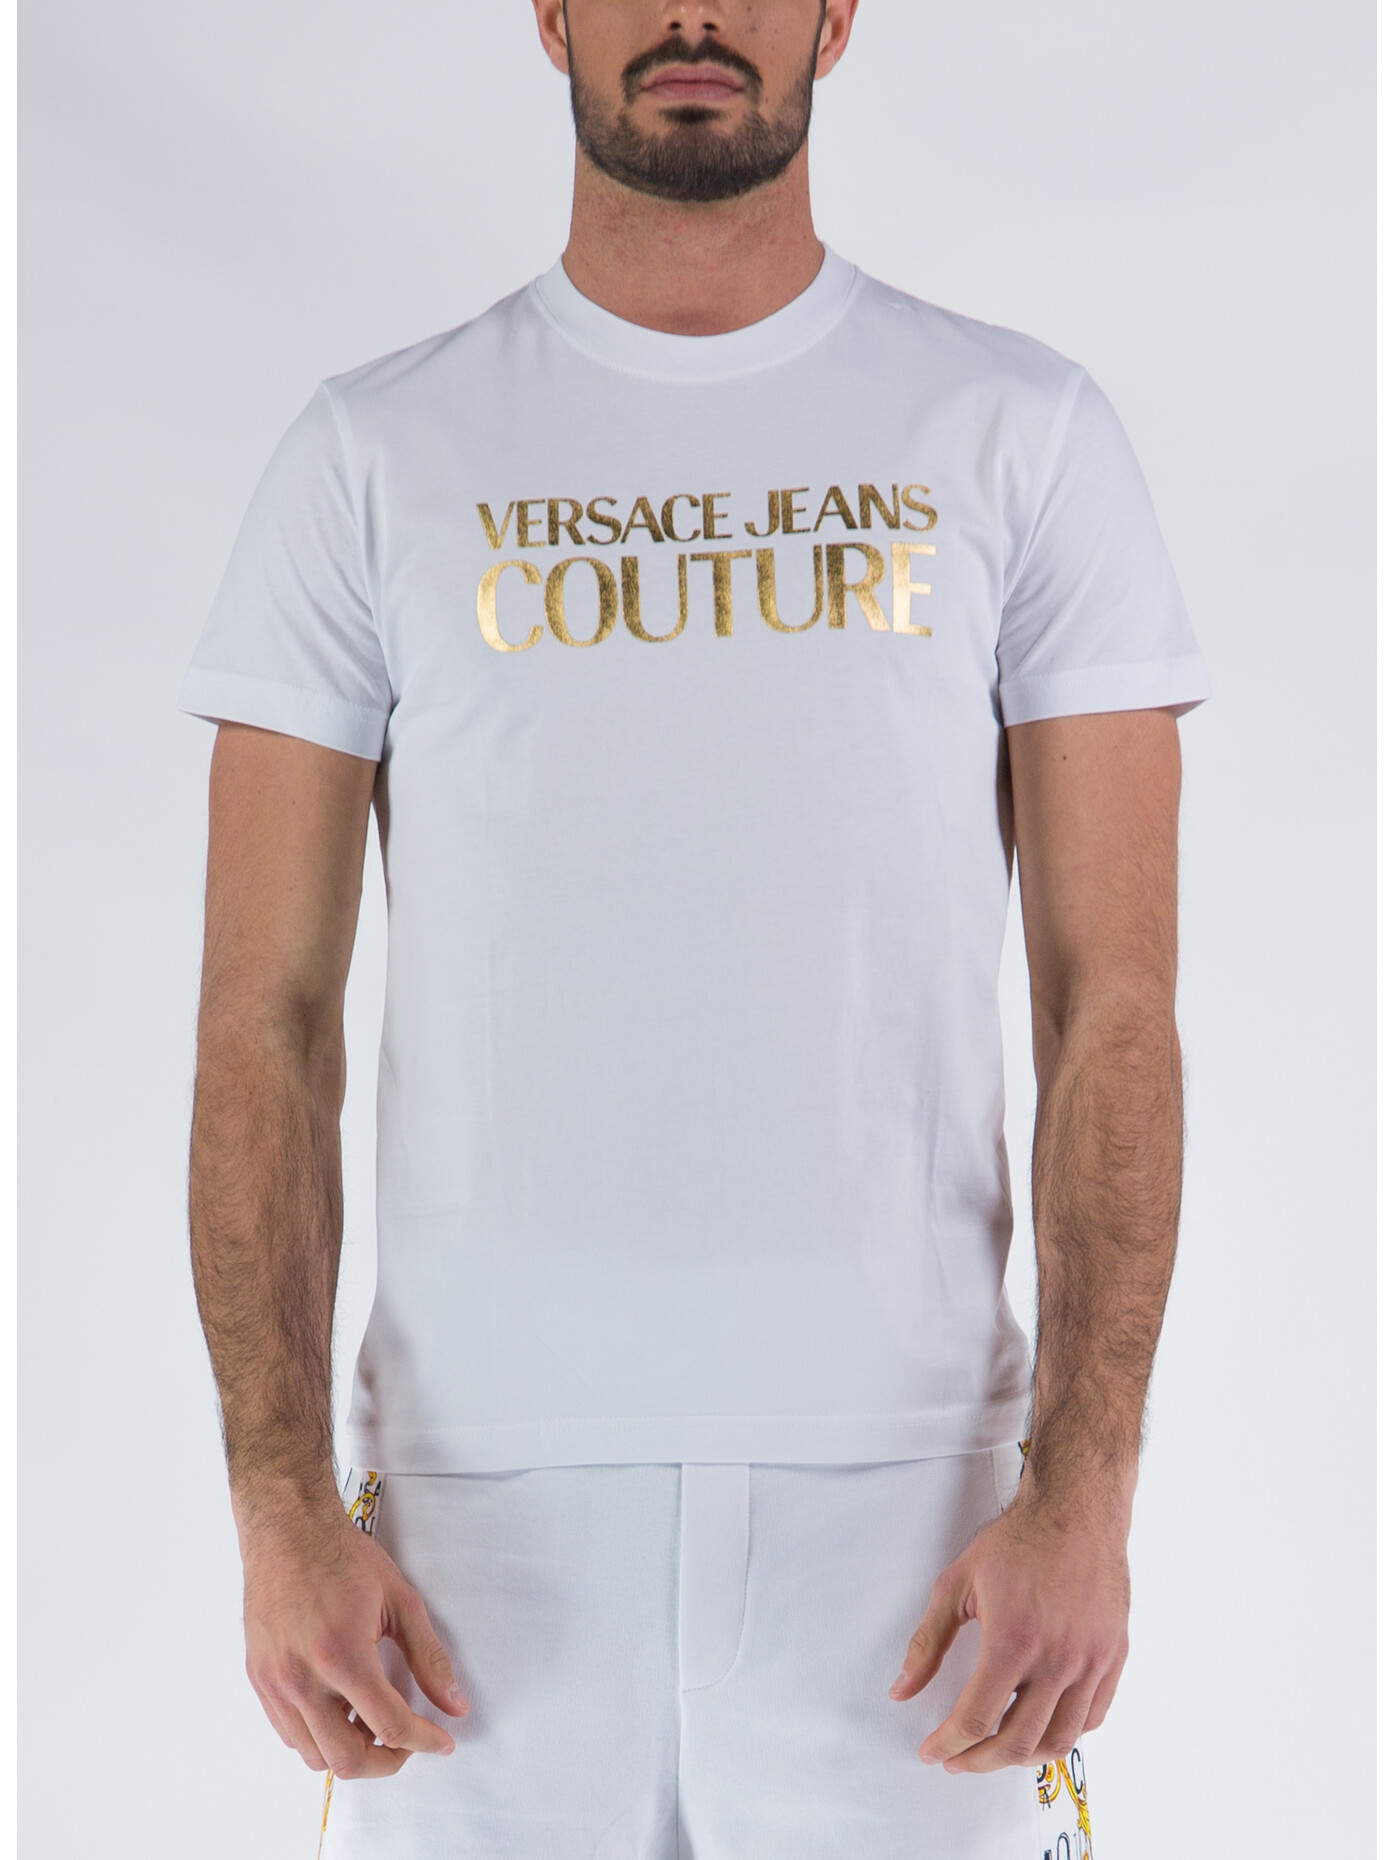 versace jeans couture t-shirt logo thick foil, uomo